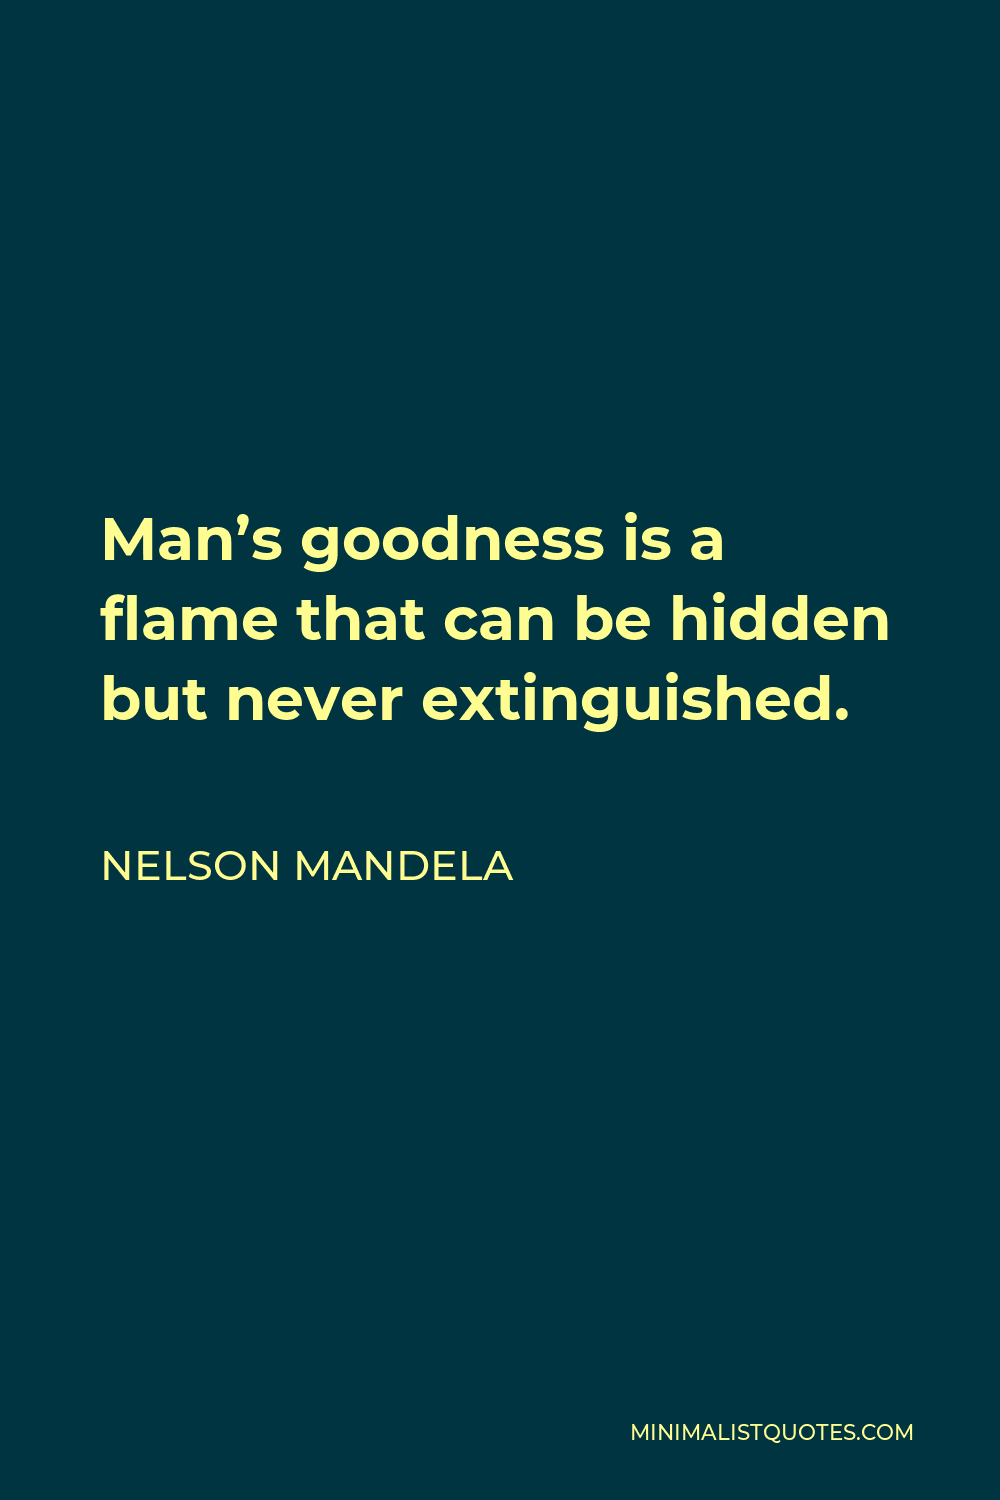 Nelson Mandela Quote - Man’s goodness is a flame that can be hidden but never extinguished.